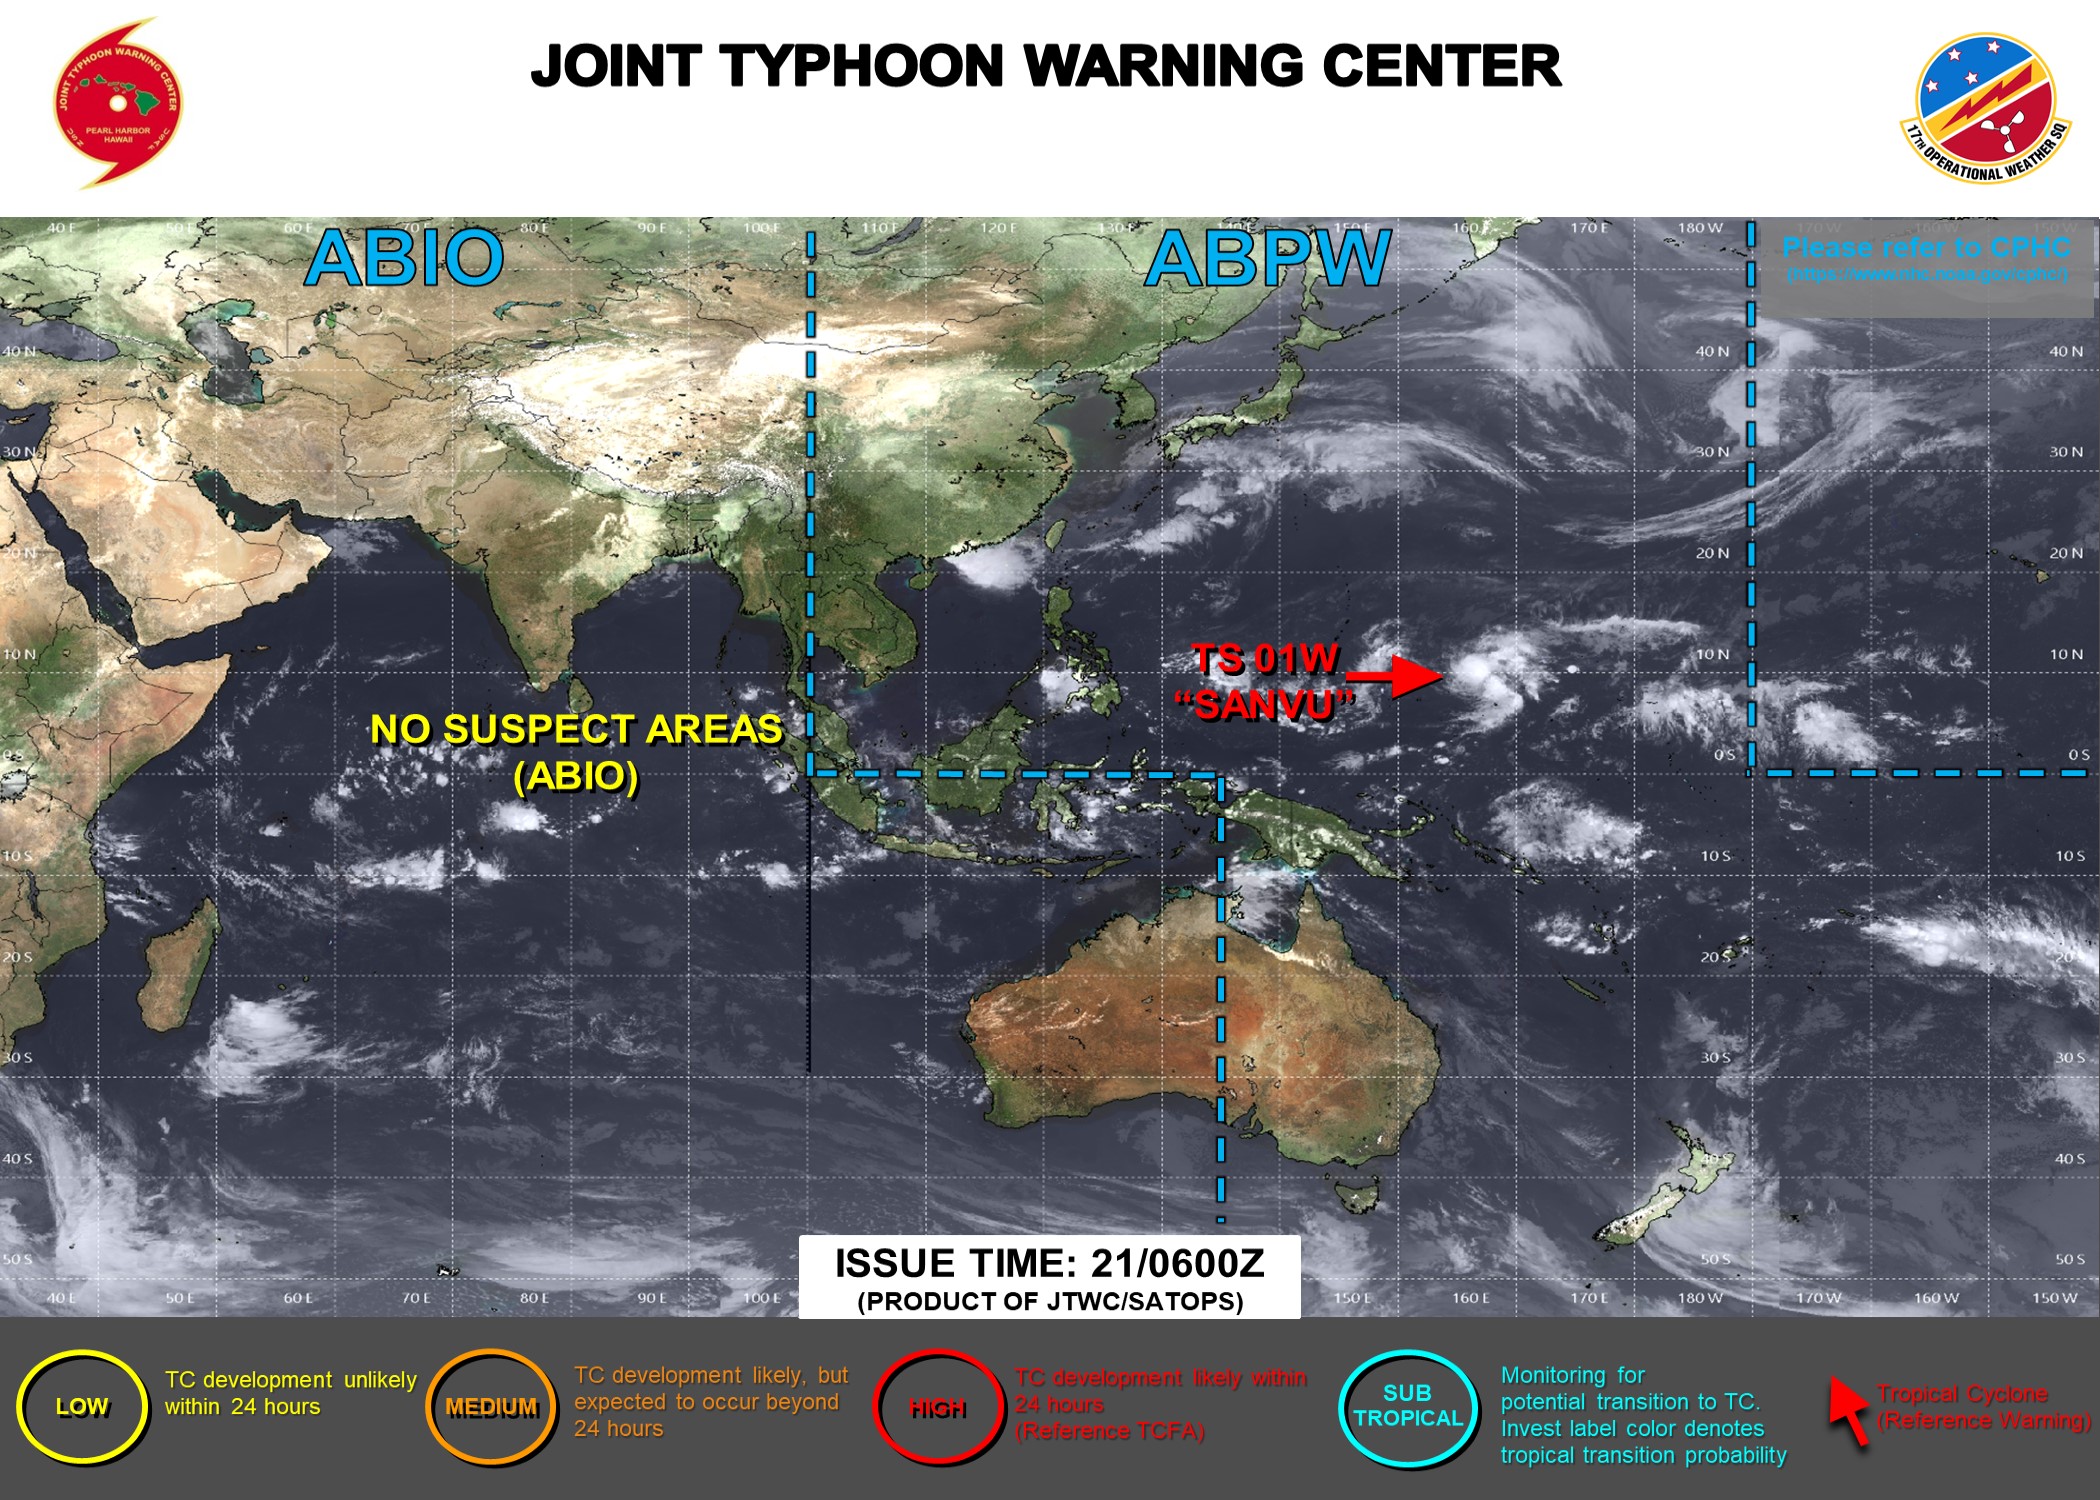 JTWC IS ISSUING 6HOURLY WARNINGS AND 3HOURLY SATELLITE BULLETINS ON TS 01W(SANVU).